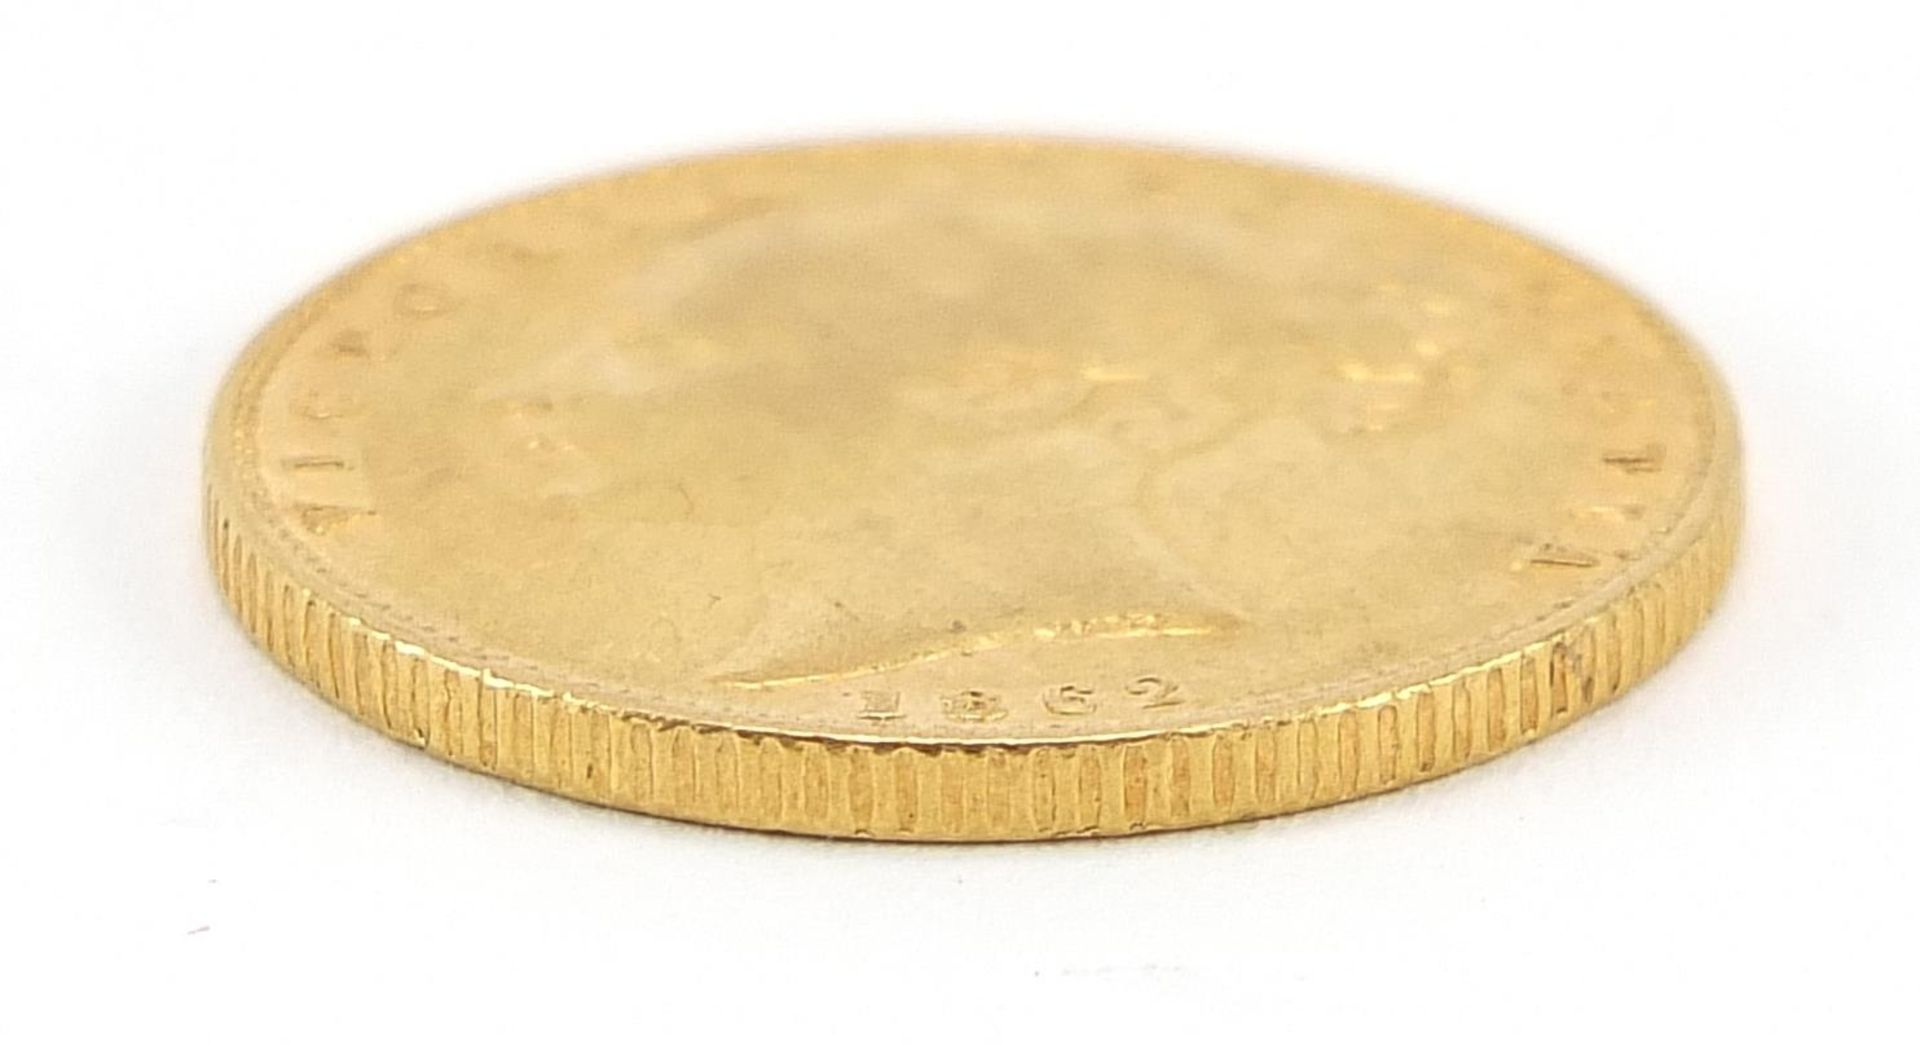 Queen Victoria Young Head 1862 shield back gold sovereign - this lot is sold without buyer's premium - Image 3 of 3